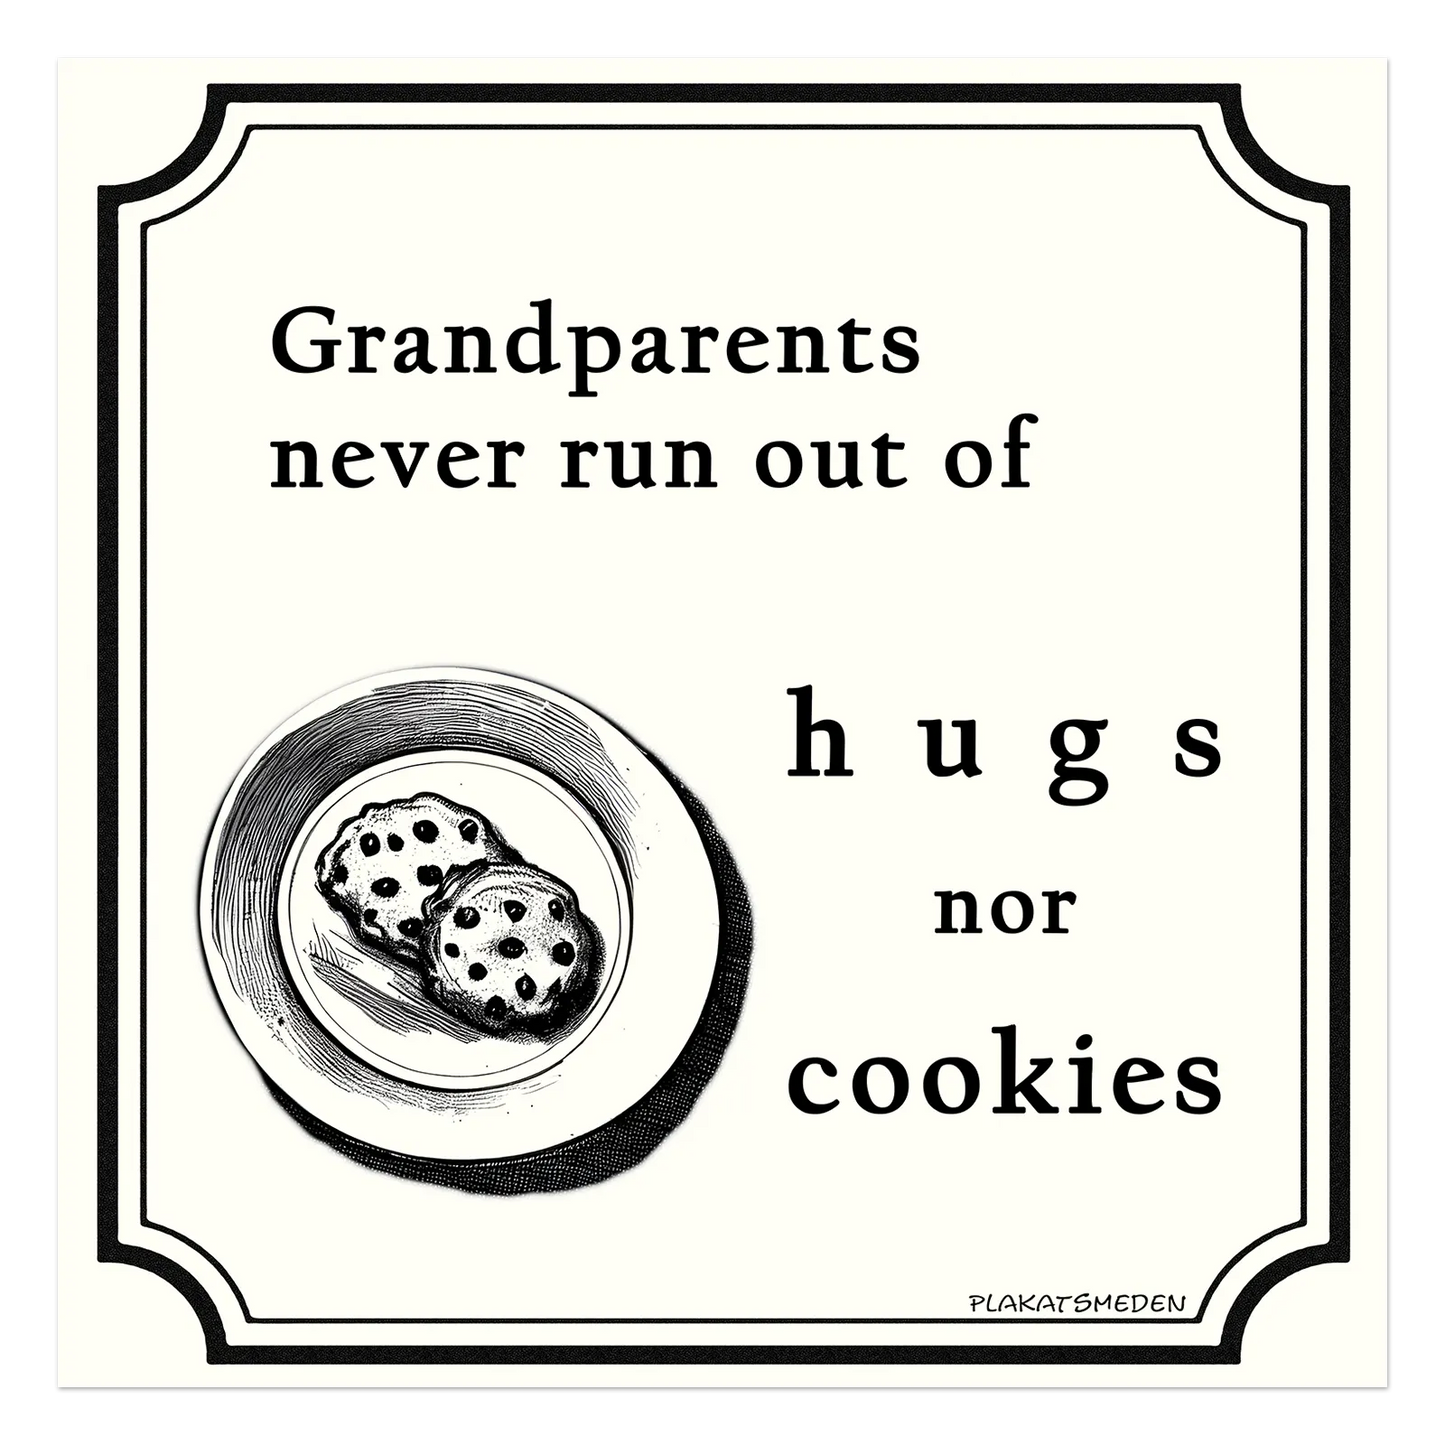 Grandparents never run out of hugs nor cookies